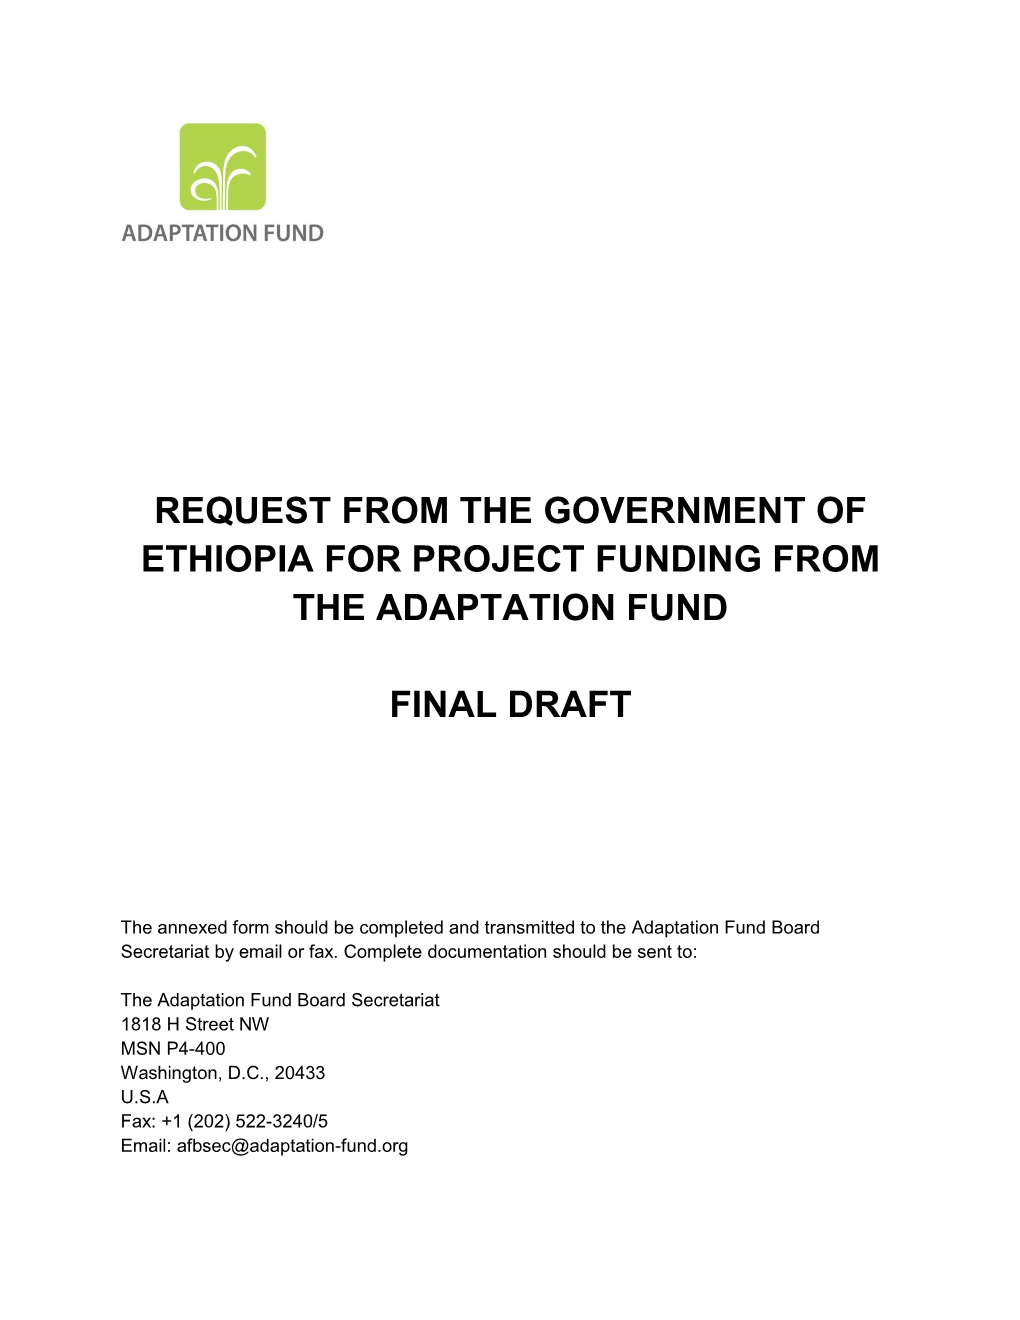 Request from the Government of Ethiopia for Project Funding from the Adaptation Fund Final Draft